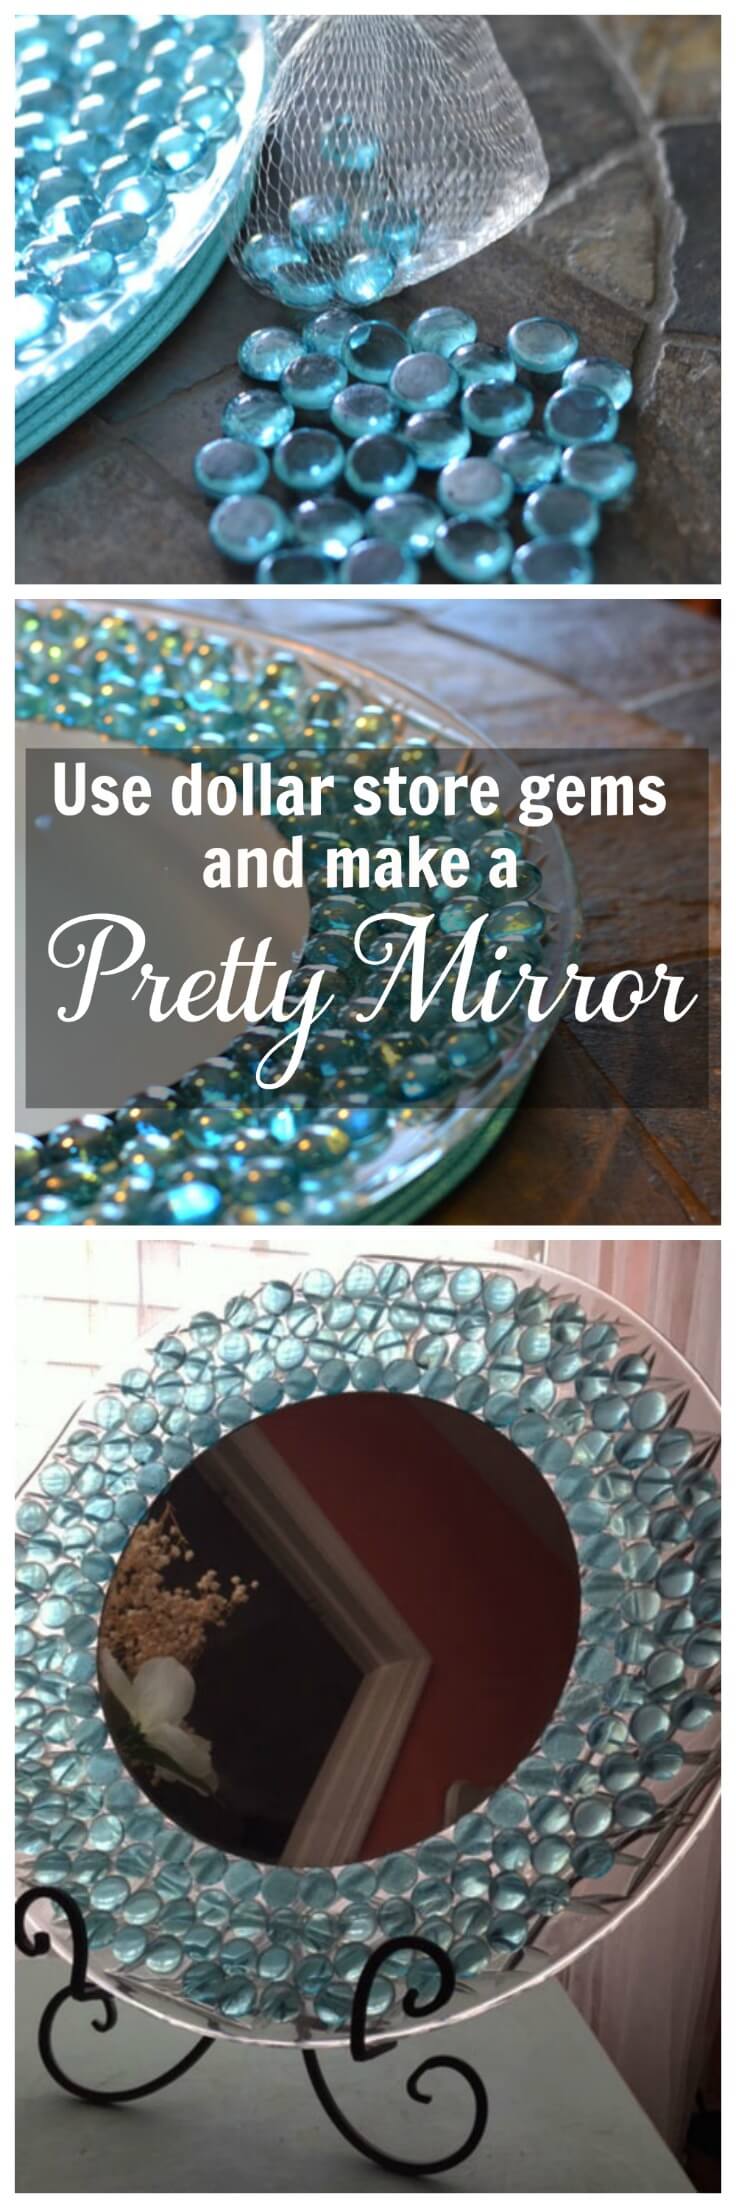 33 Best DIY Dollar Store Home Decor Ideas and Designs for 2021